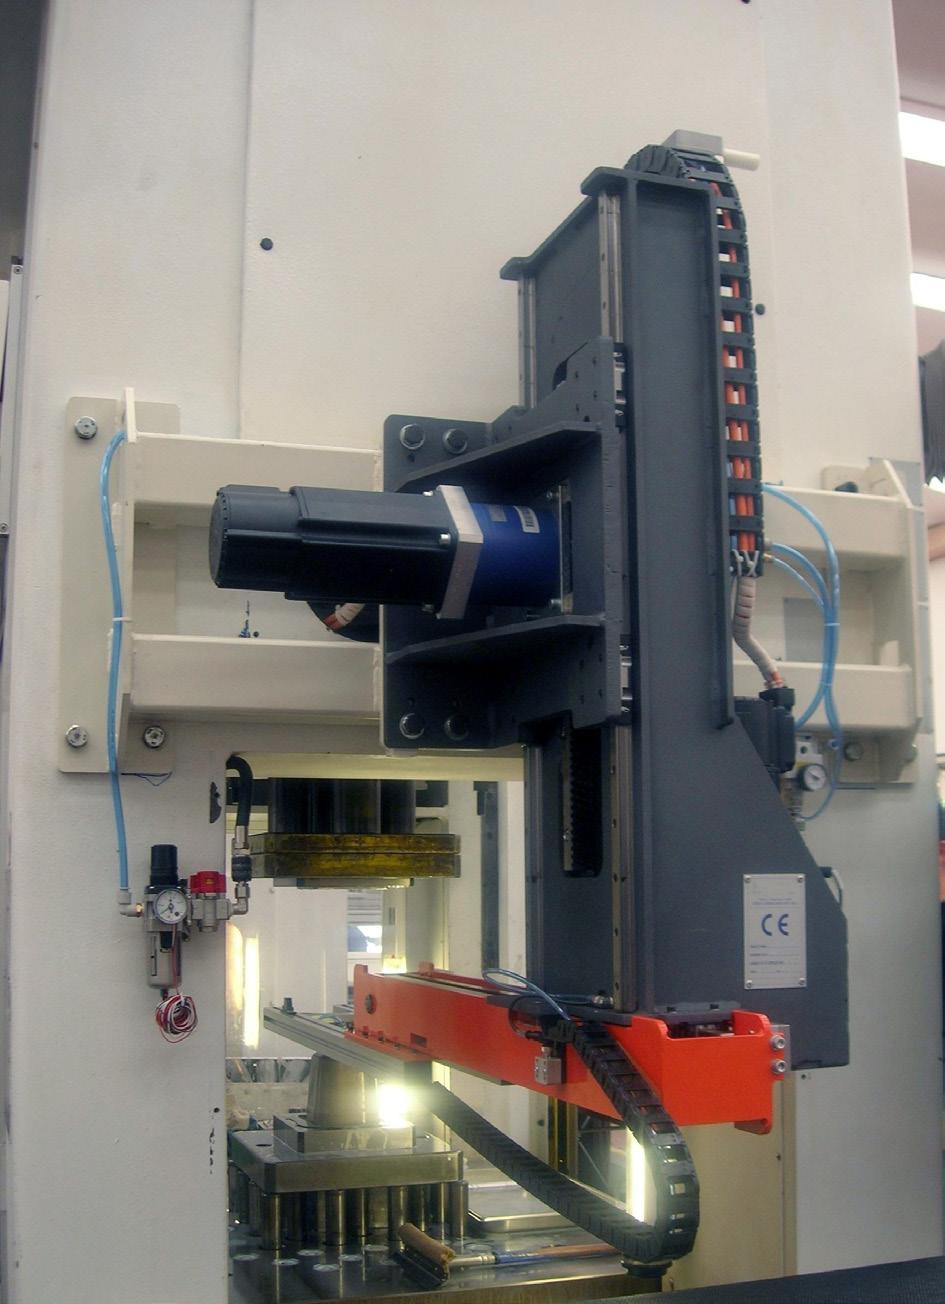 Many years of experience developed by ArgoMatic technicians into develop and installation of automation for metal forming machines allow ArgoMatic to retrofit any